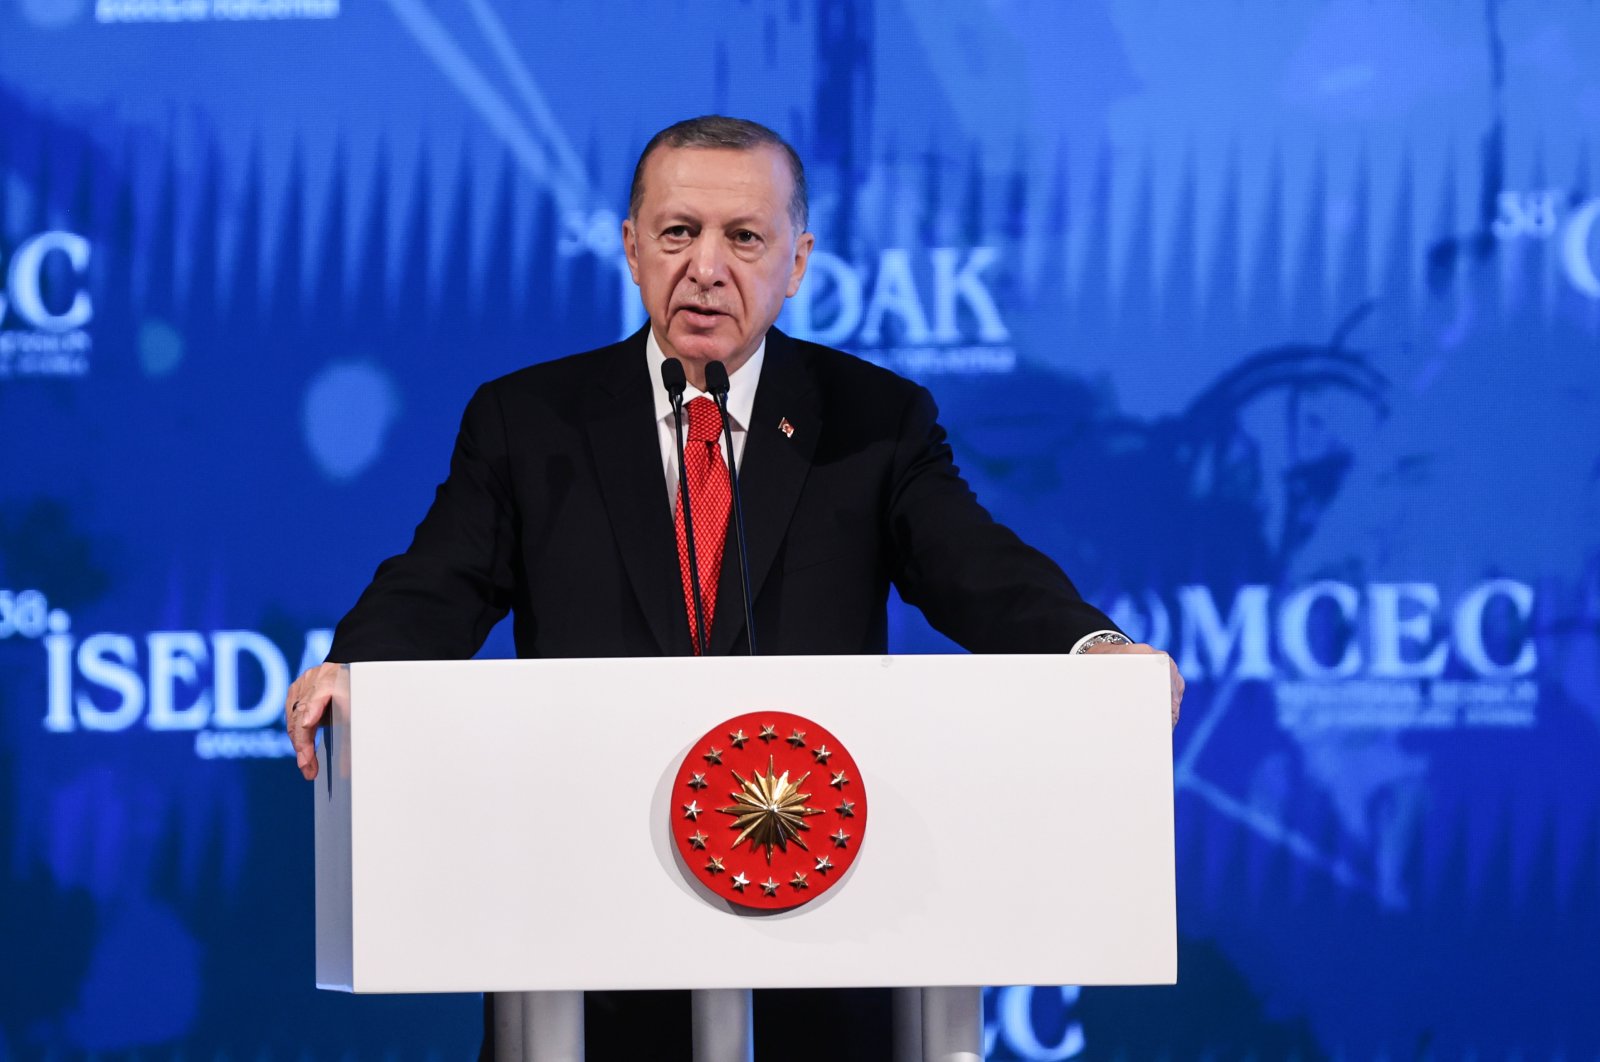 President Recep Tayyip Erdoğan speaking at the 38th Ministerial Session of the Standing Committee for Economic and Commercial Cooperation (COMCEC) of the Organisation of Islamic Cooperation (OIC) in Istanbul, Türkiye, Nov. 28, 2022. (AA Photo)